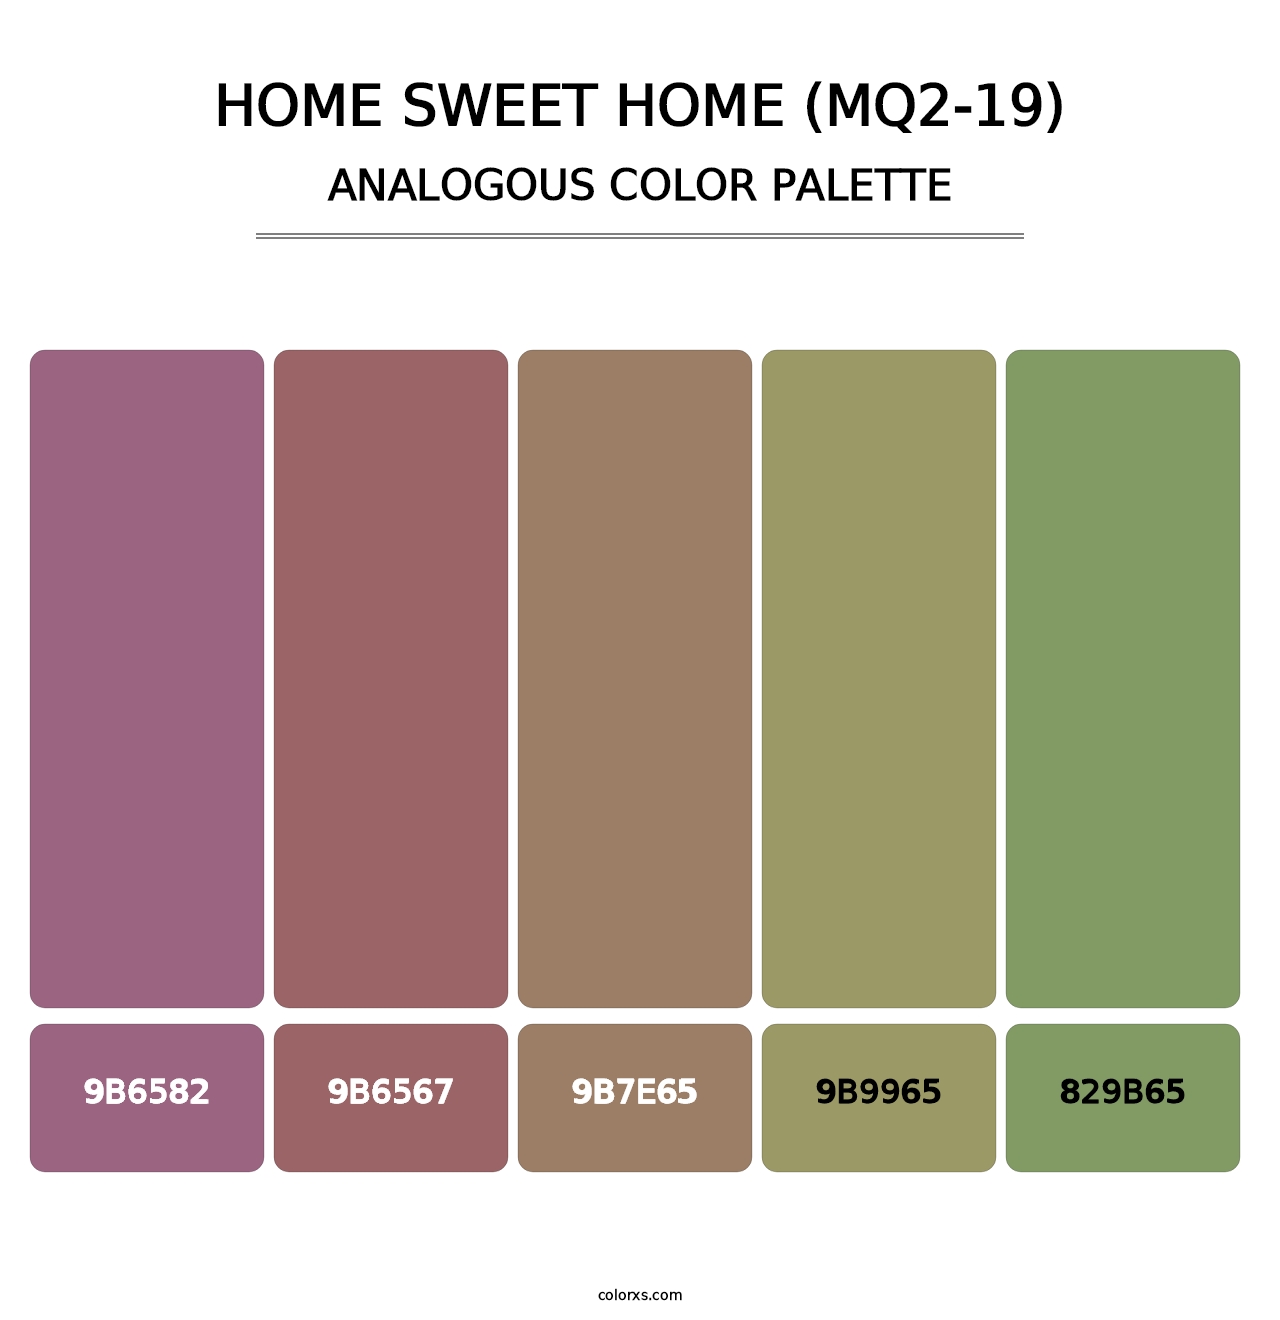 Home Sweet Home (MQ2-19) - Analogous Color Palette